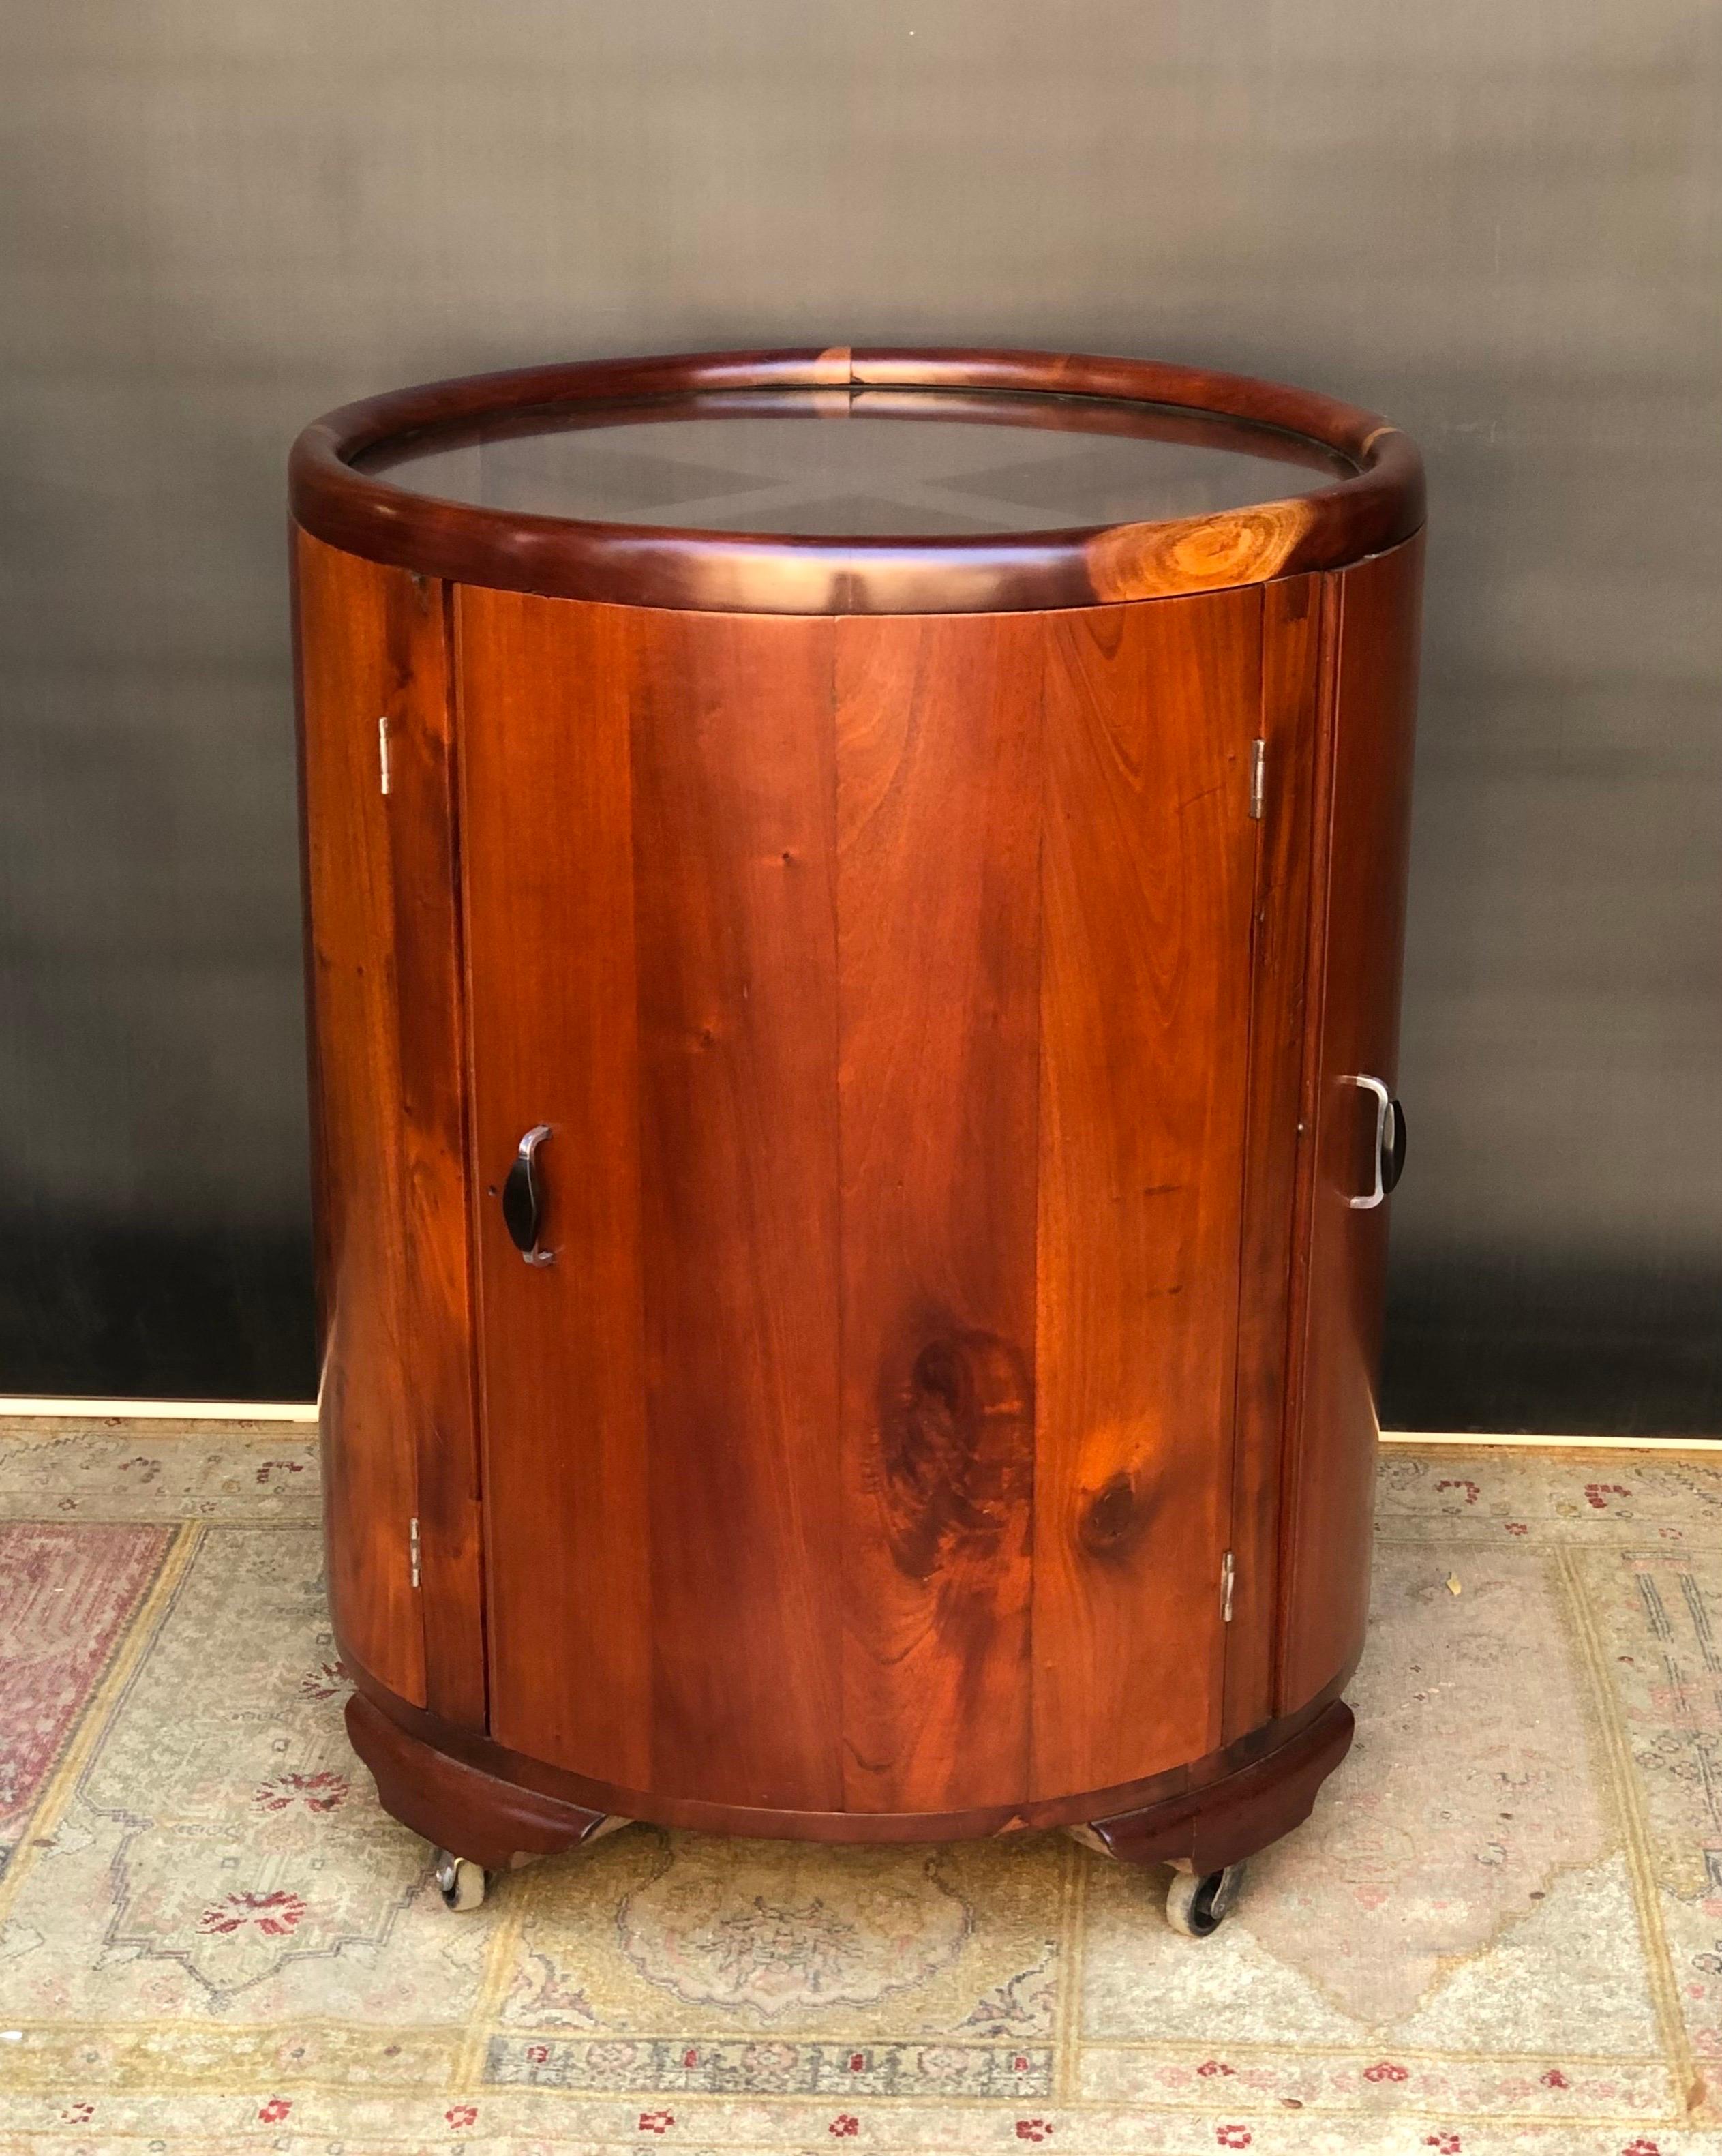 Jamaican Art Deco Round Bar/Cocktail Cabinet By Burnett Webster(circa.1934-1939) For Sale 11